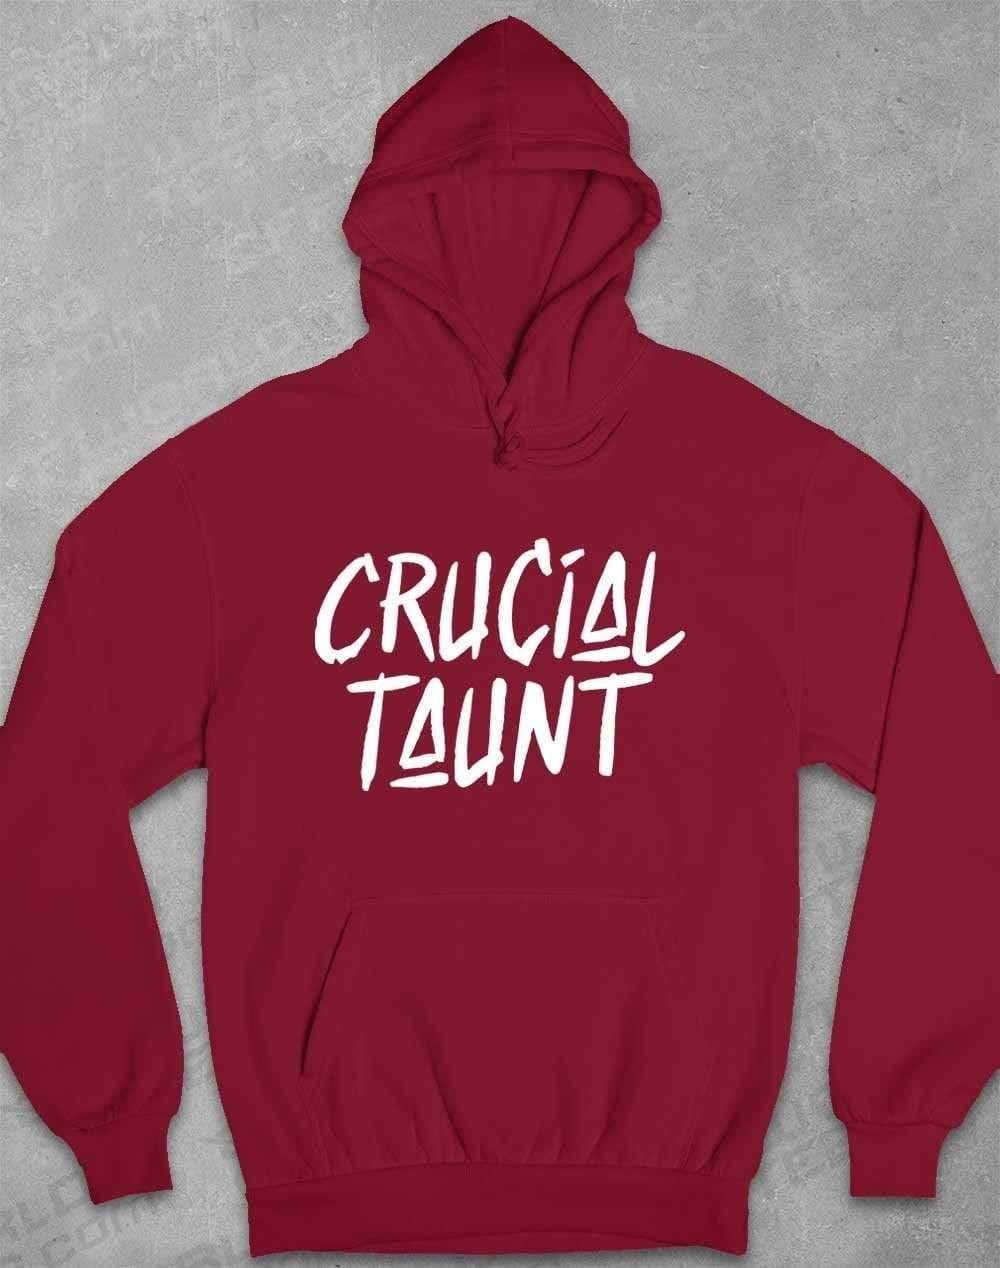 Crucial Taunt Hoodie XS / Burgundy  - Off World Tees